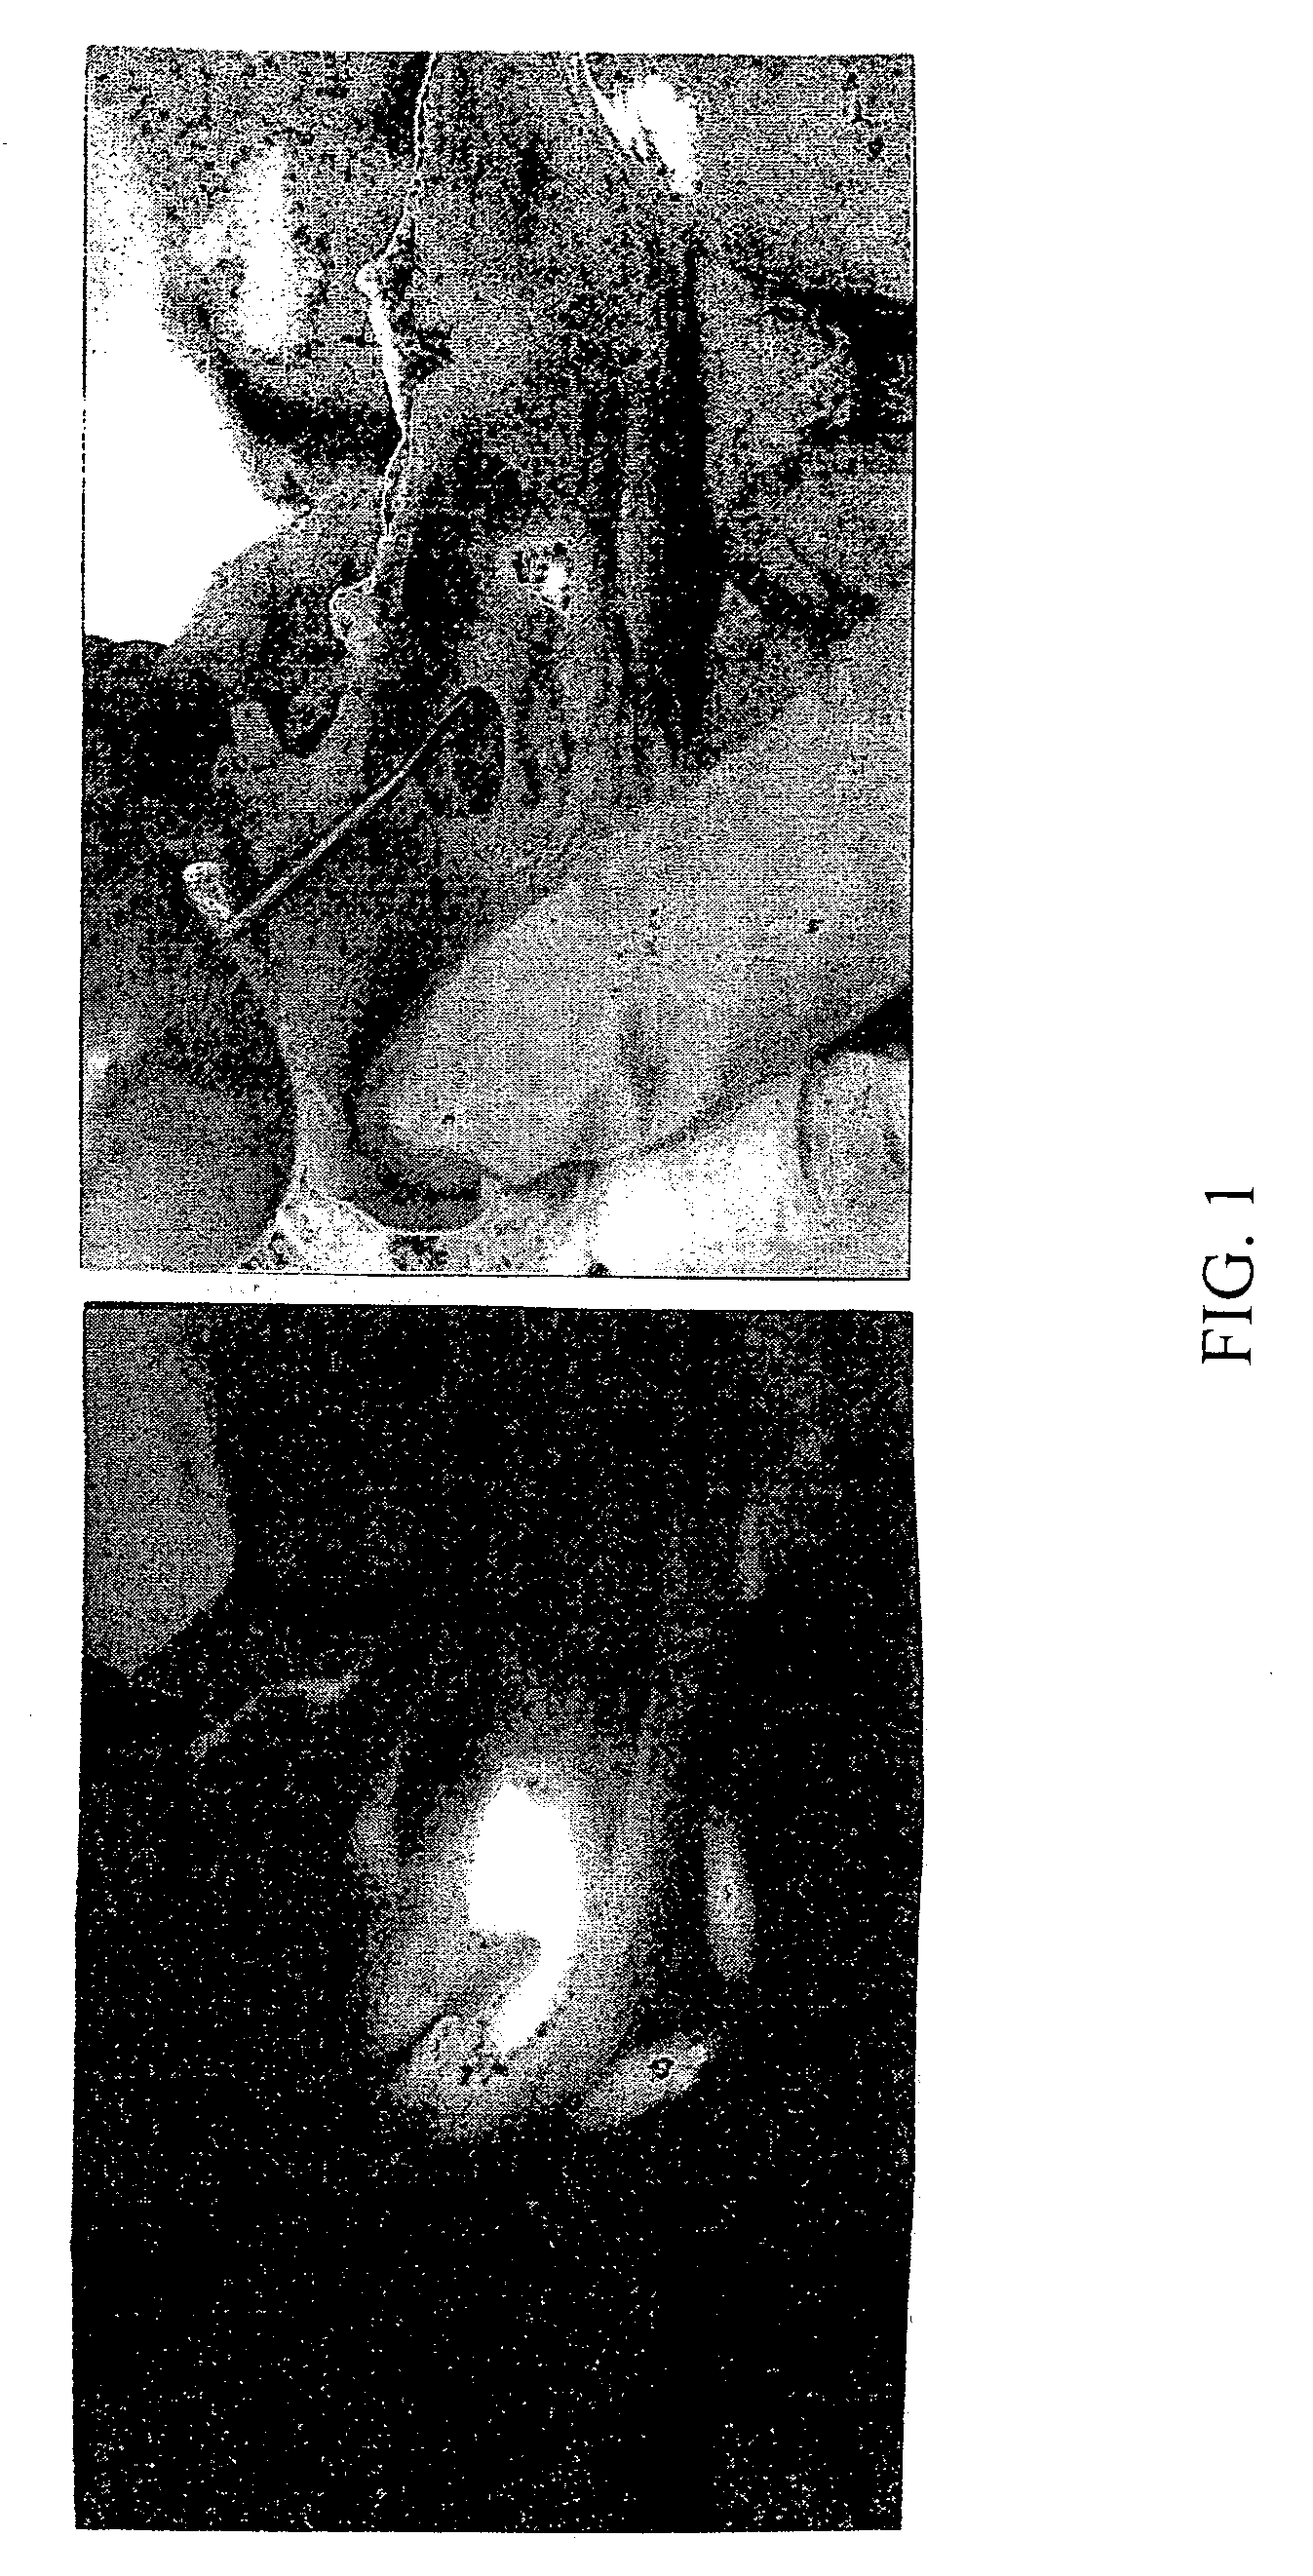 Method and apparatus for detecting and achieving closure of patent foramen ovale